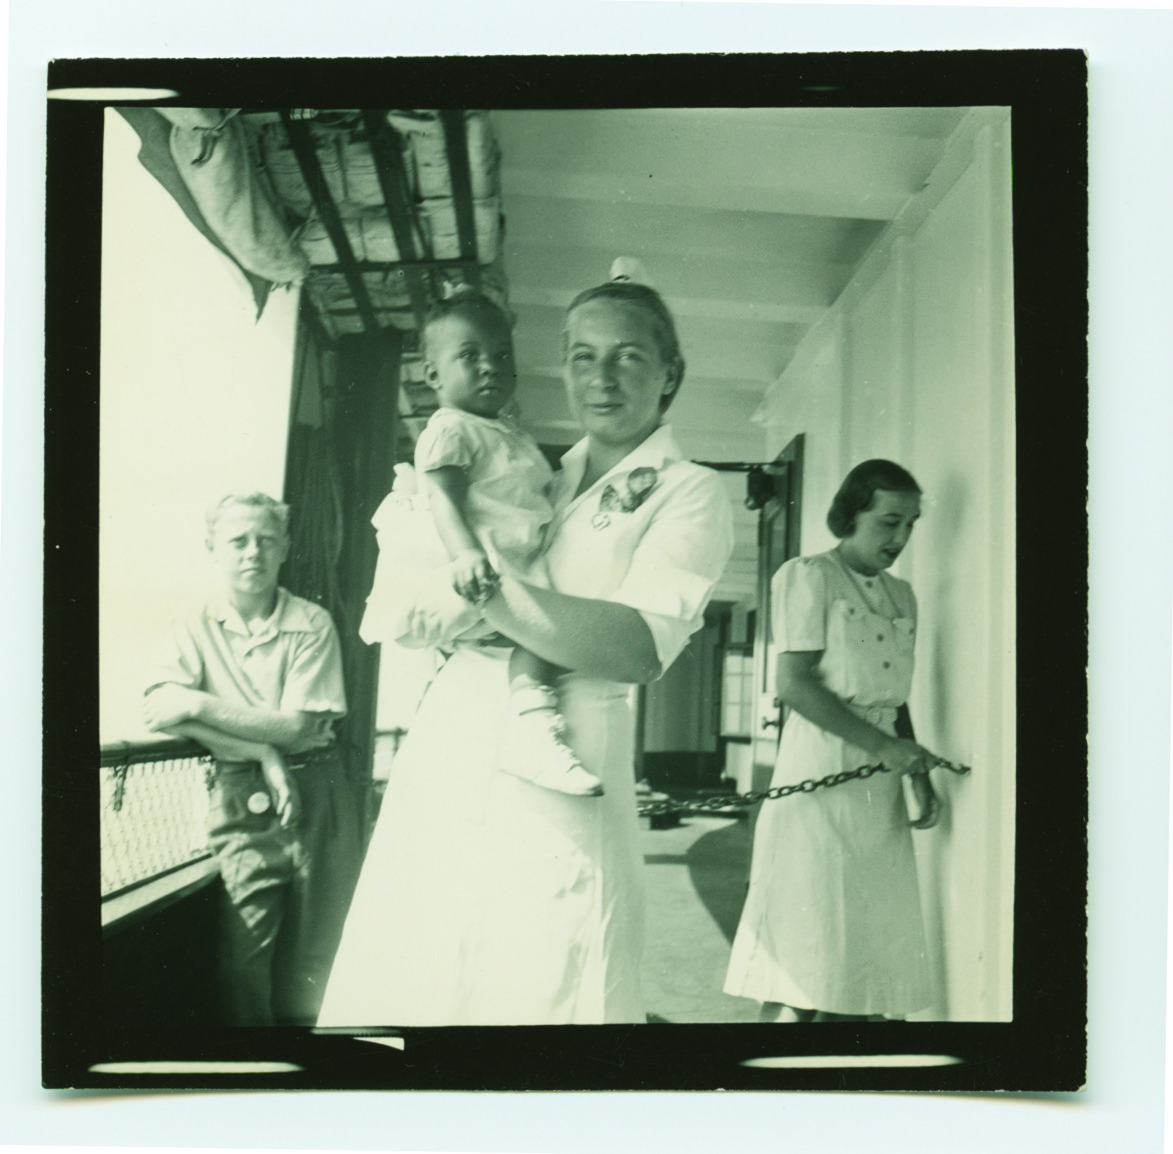 A nurse holding a tiny patient aboard the ship in 1941.